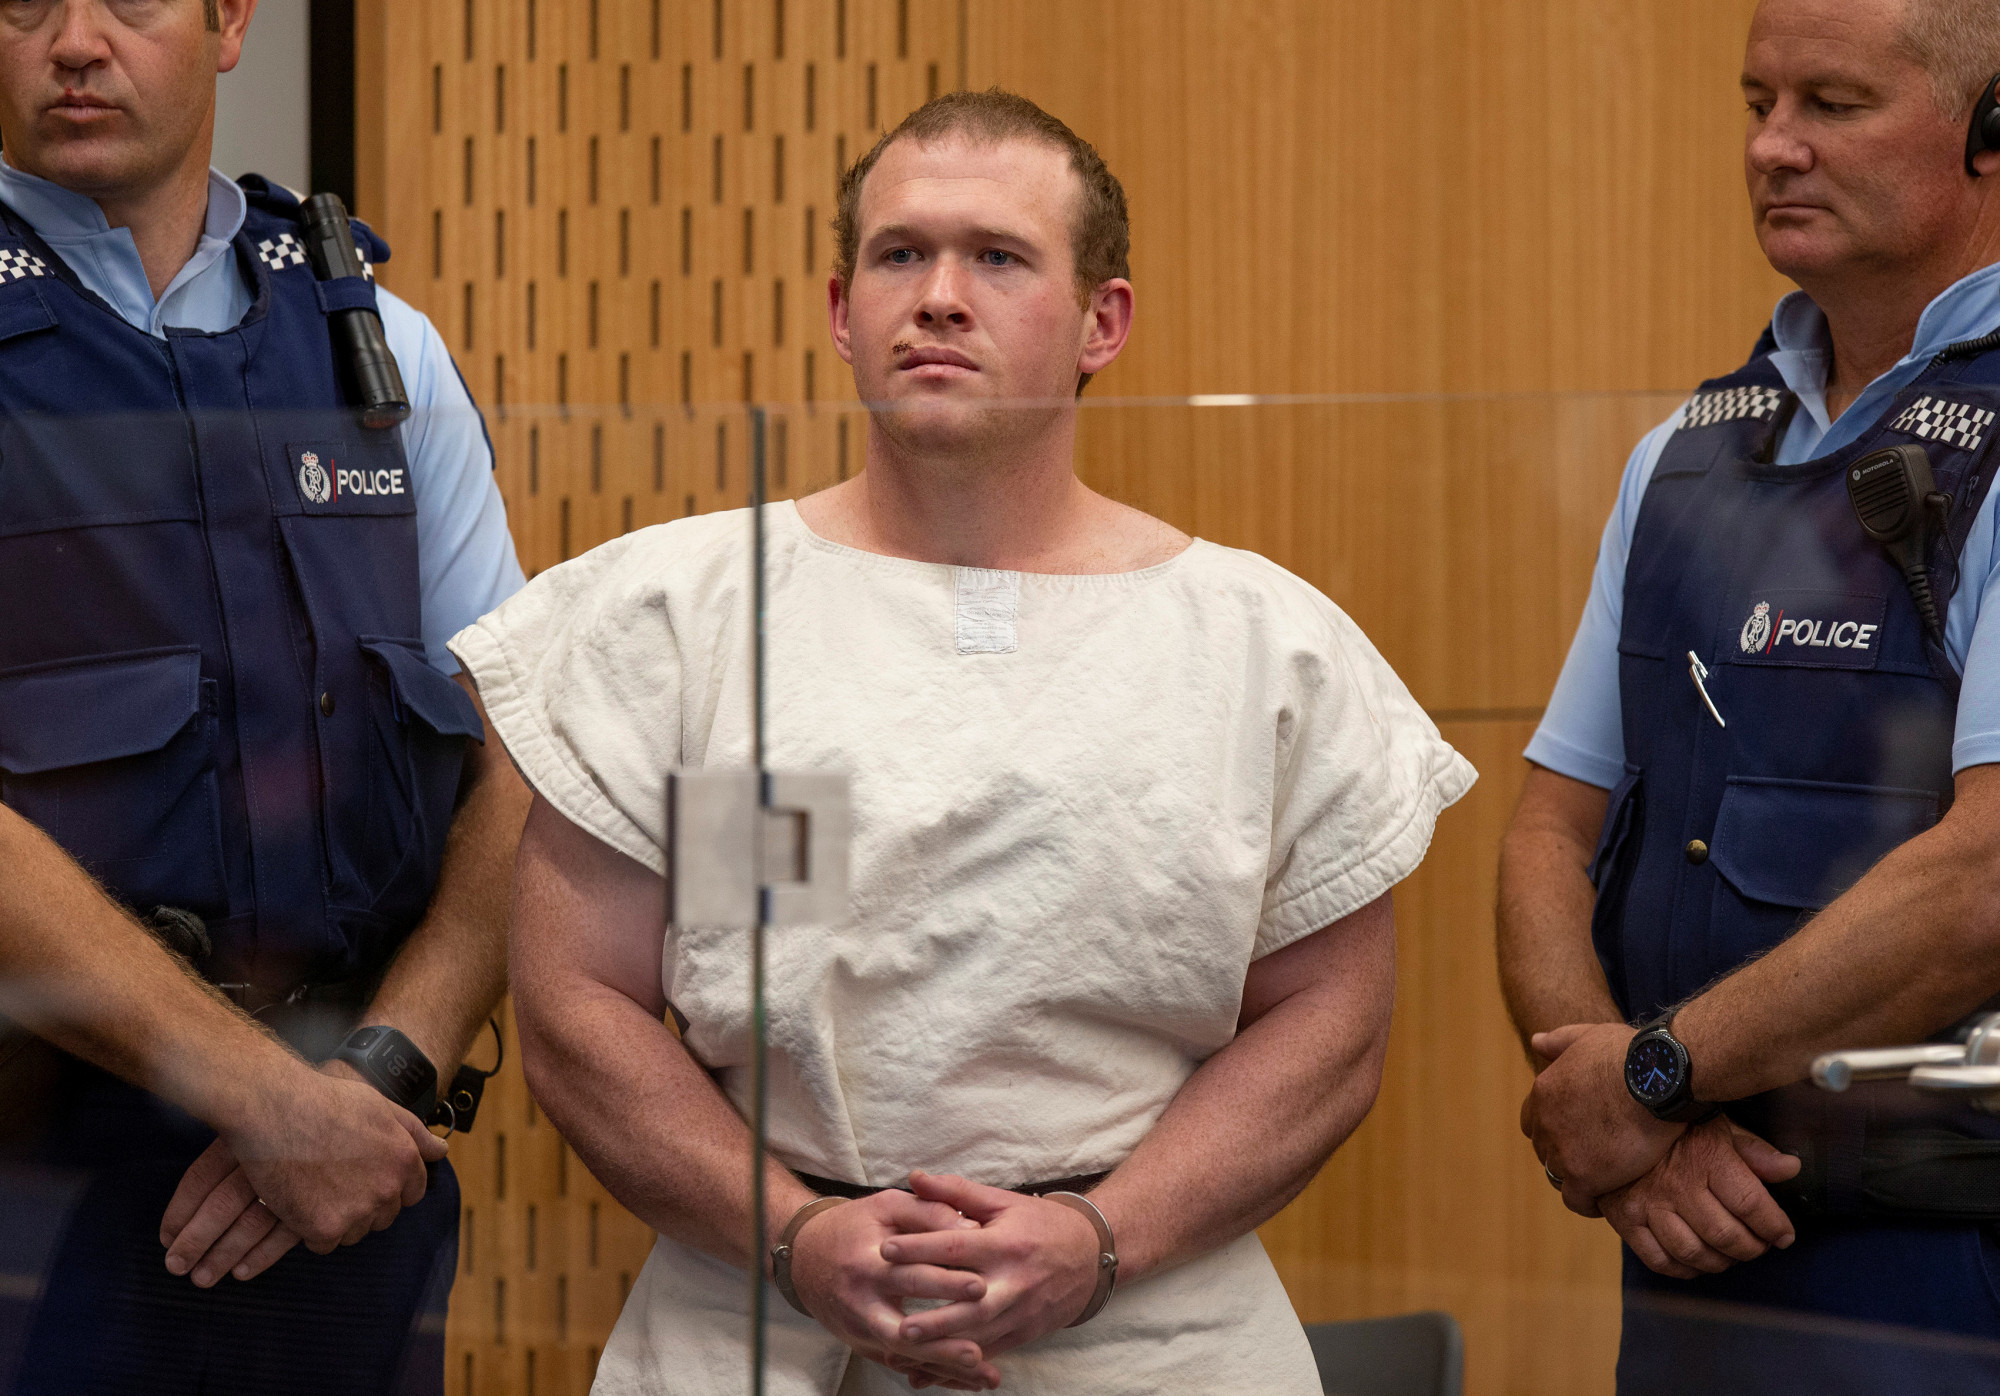 New Zealand Mosque Shooter Arrives in Christchurch for Sentencing